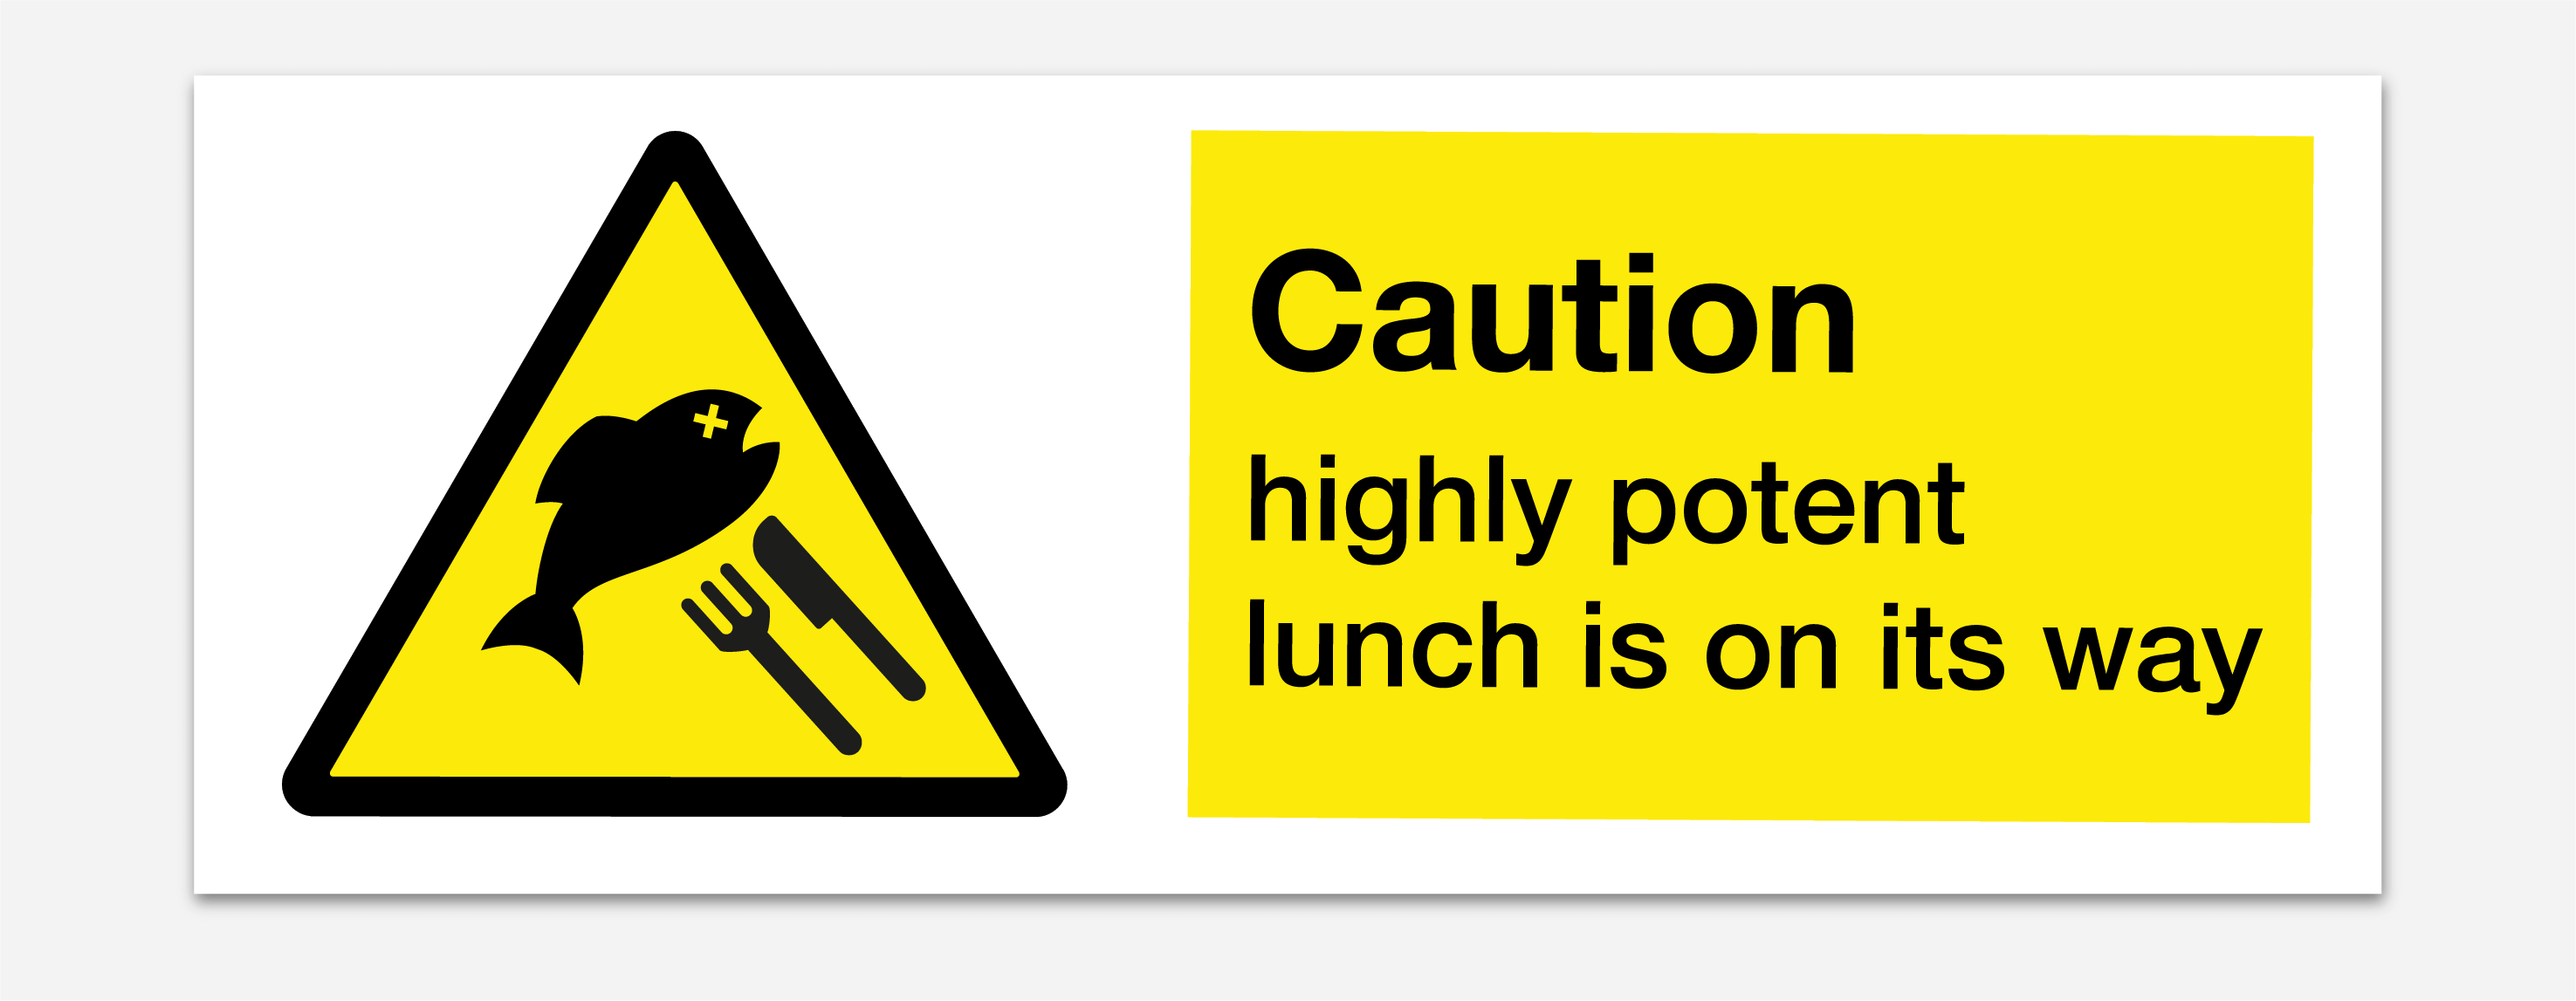 potent-lunch